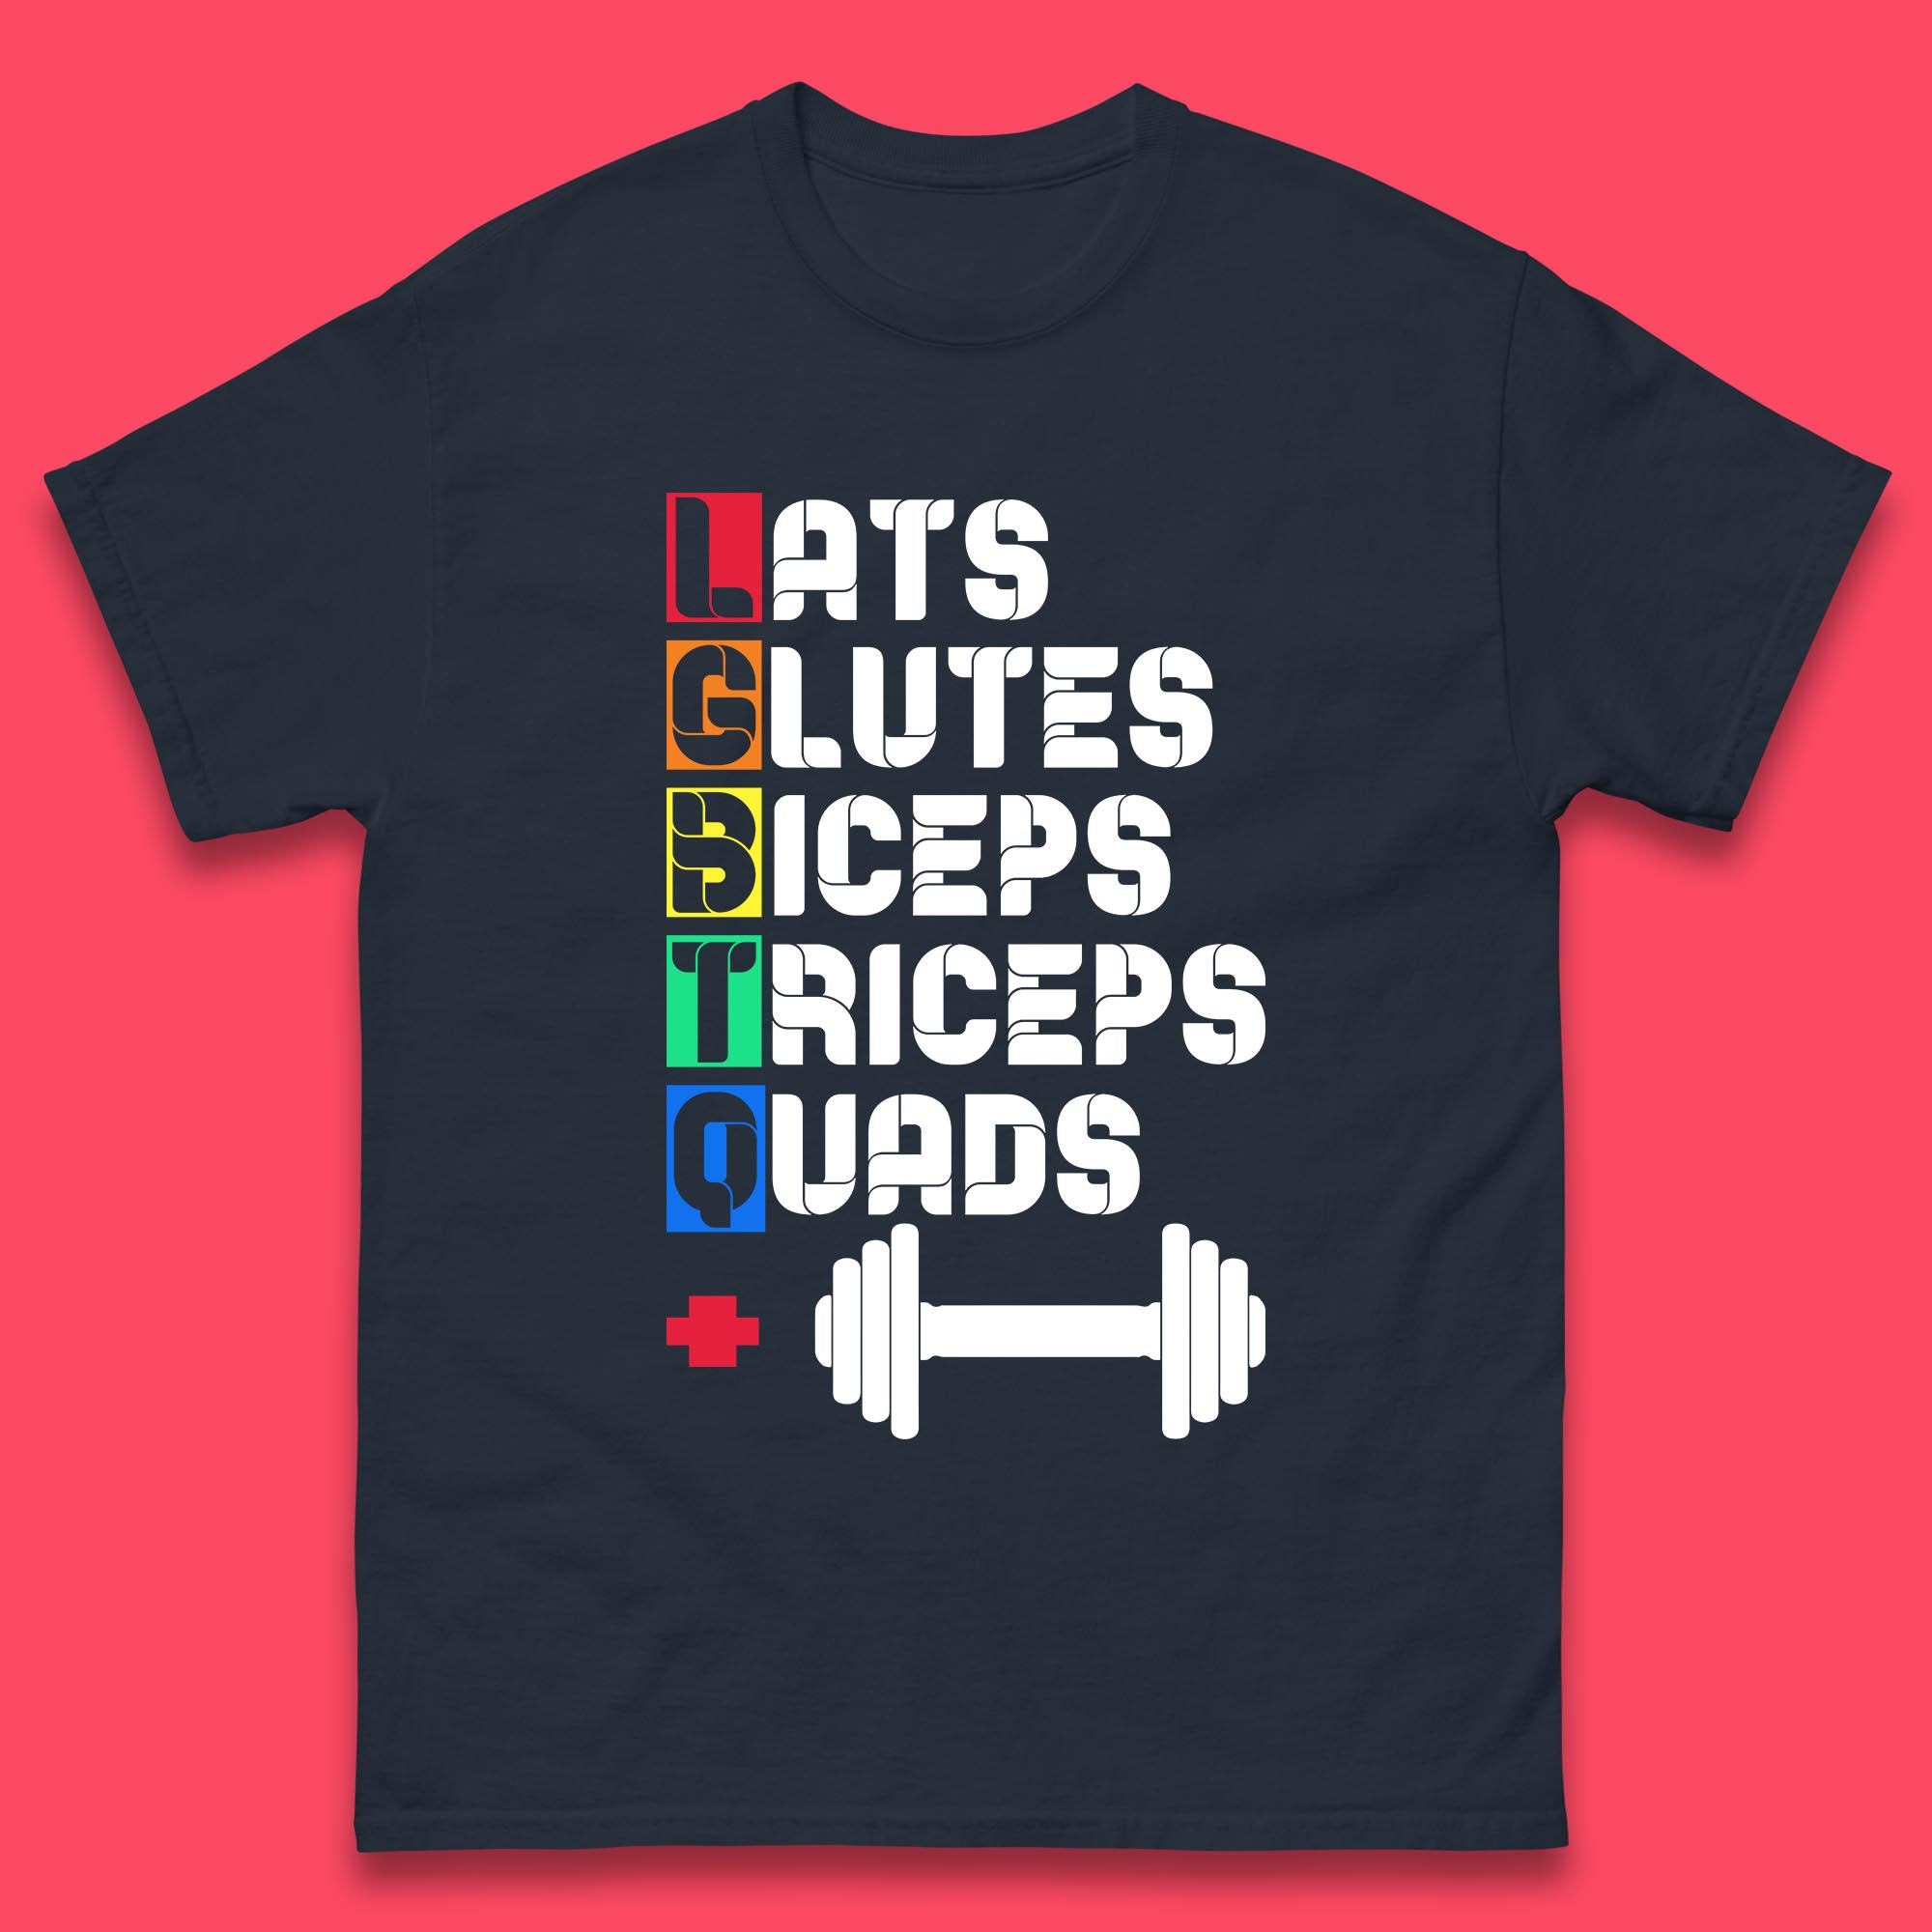 Lats Glutes Biceps Triceps Quads LGBTQ+ Fitness Gym Gay Pride Workout Mens Tee Top